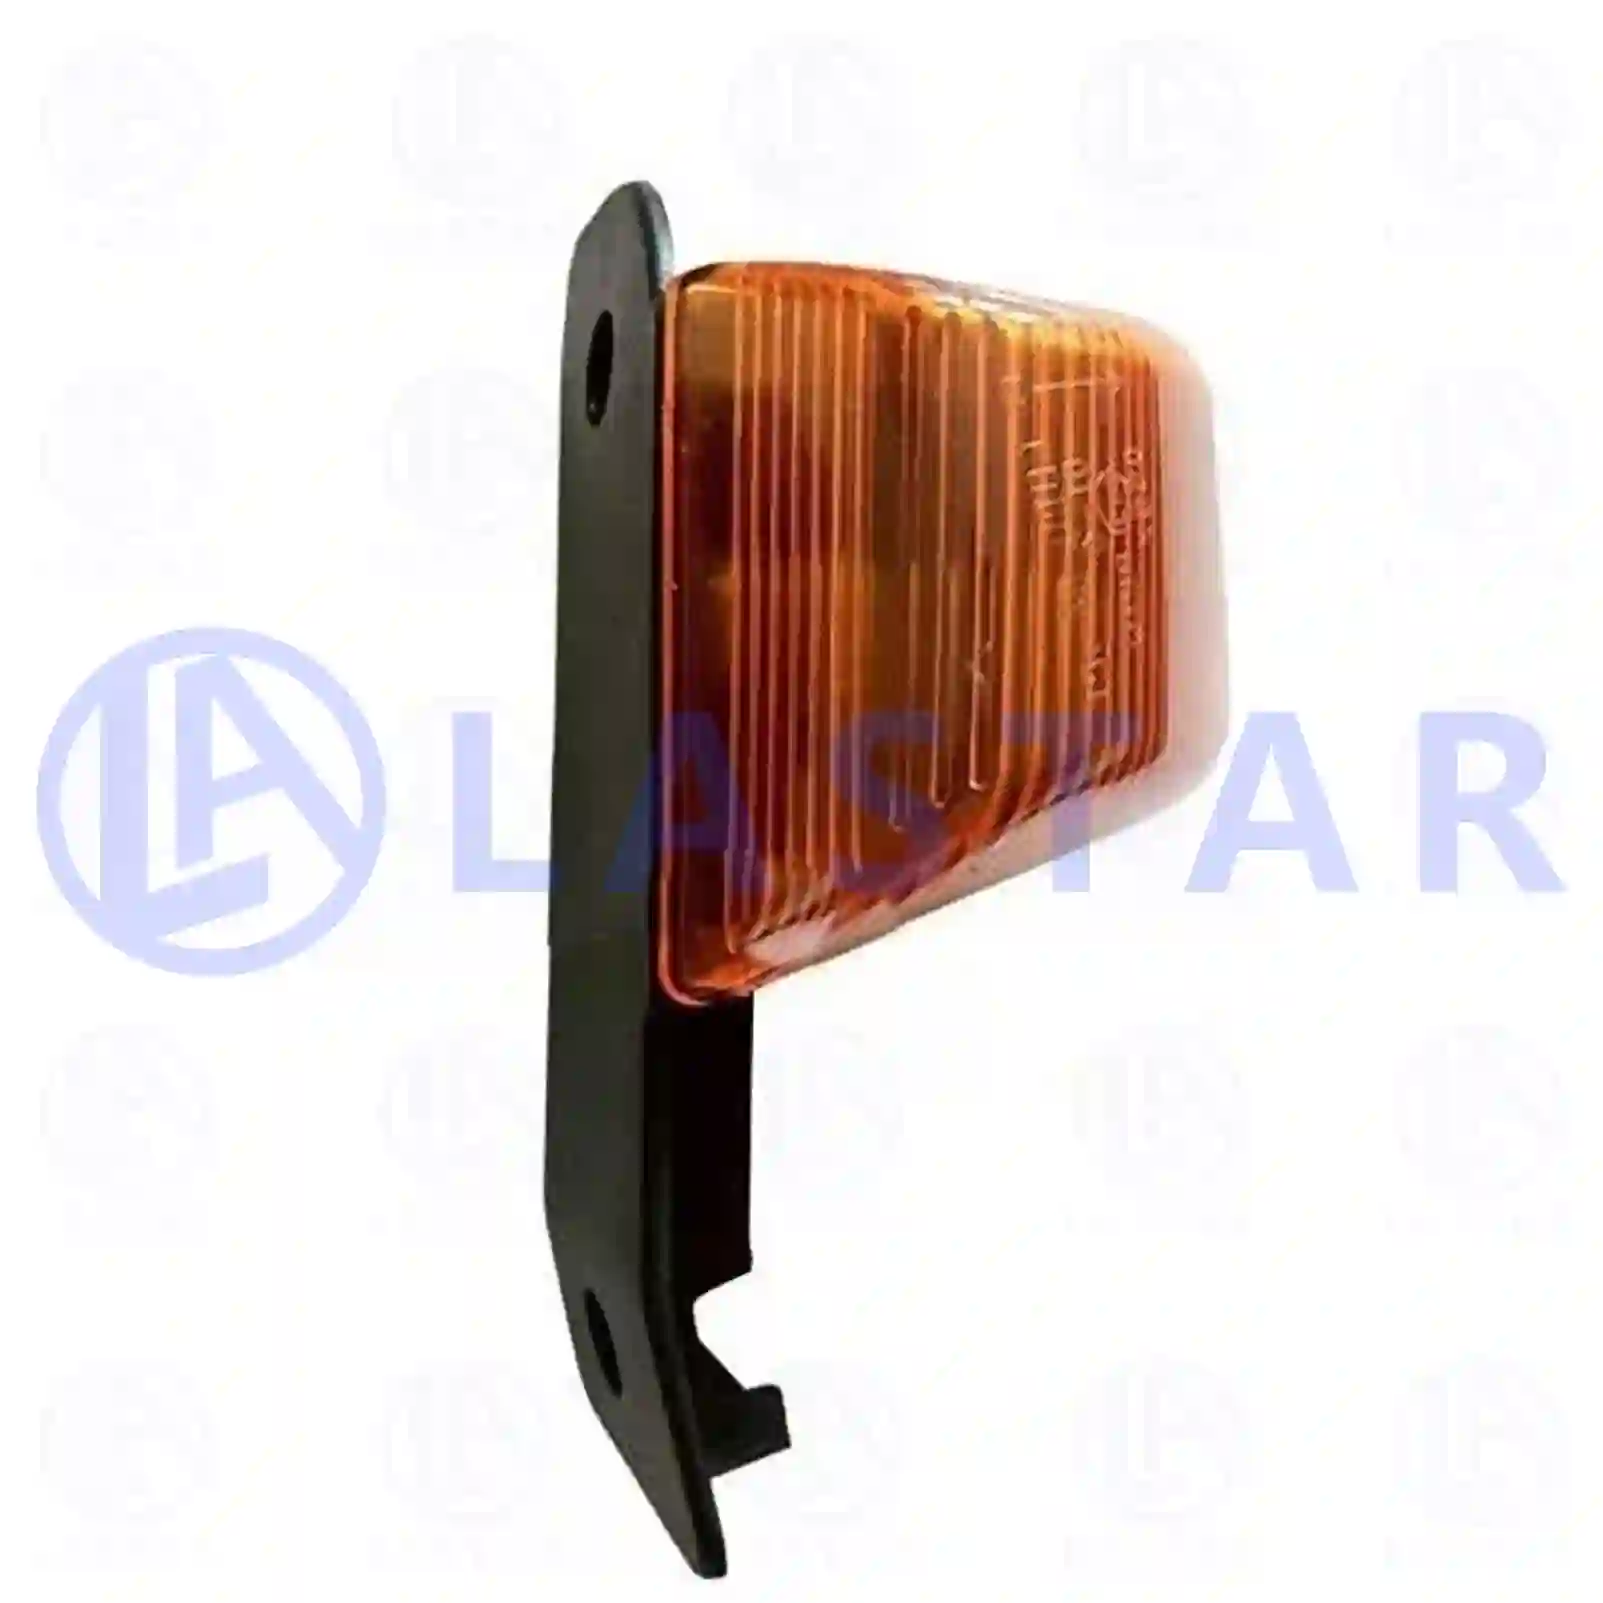 Side marking lamp, right, with bulb, 77713004, 504098243, ZG20892-0008 ||  77713004 Lastar Spare Part | Truck Spare Parts, Auotomotive Spare Parts Side marking lamp, right, with bulb, 77713004, 504098243, ZG20892-0008 ||  77713004 Lastar Spare Part | Truck Spare Parts, Auotomotive Spare Parts